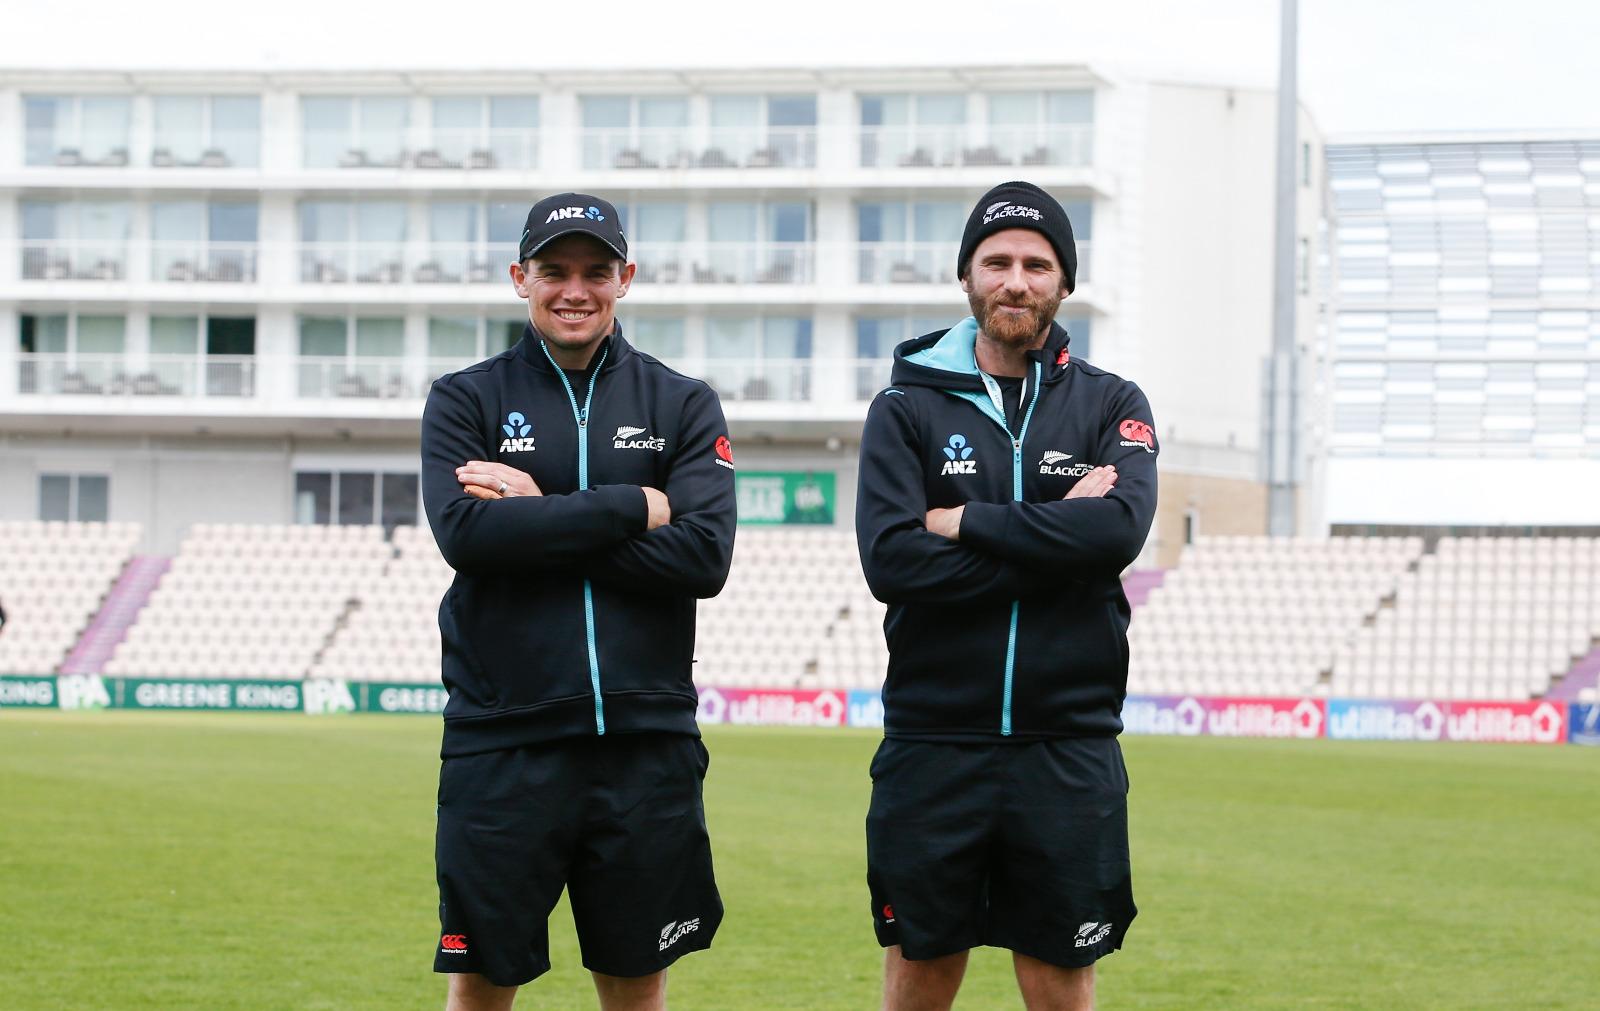 Eng vs NZ Nice to start getting on grass pitches after being indoors, says Williamson